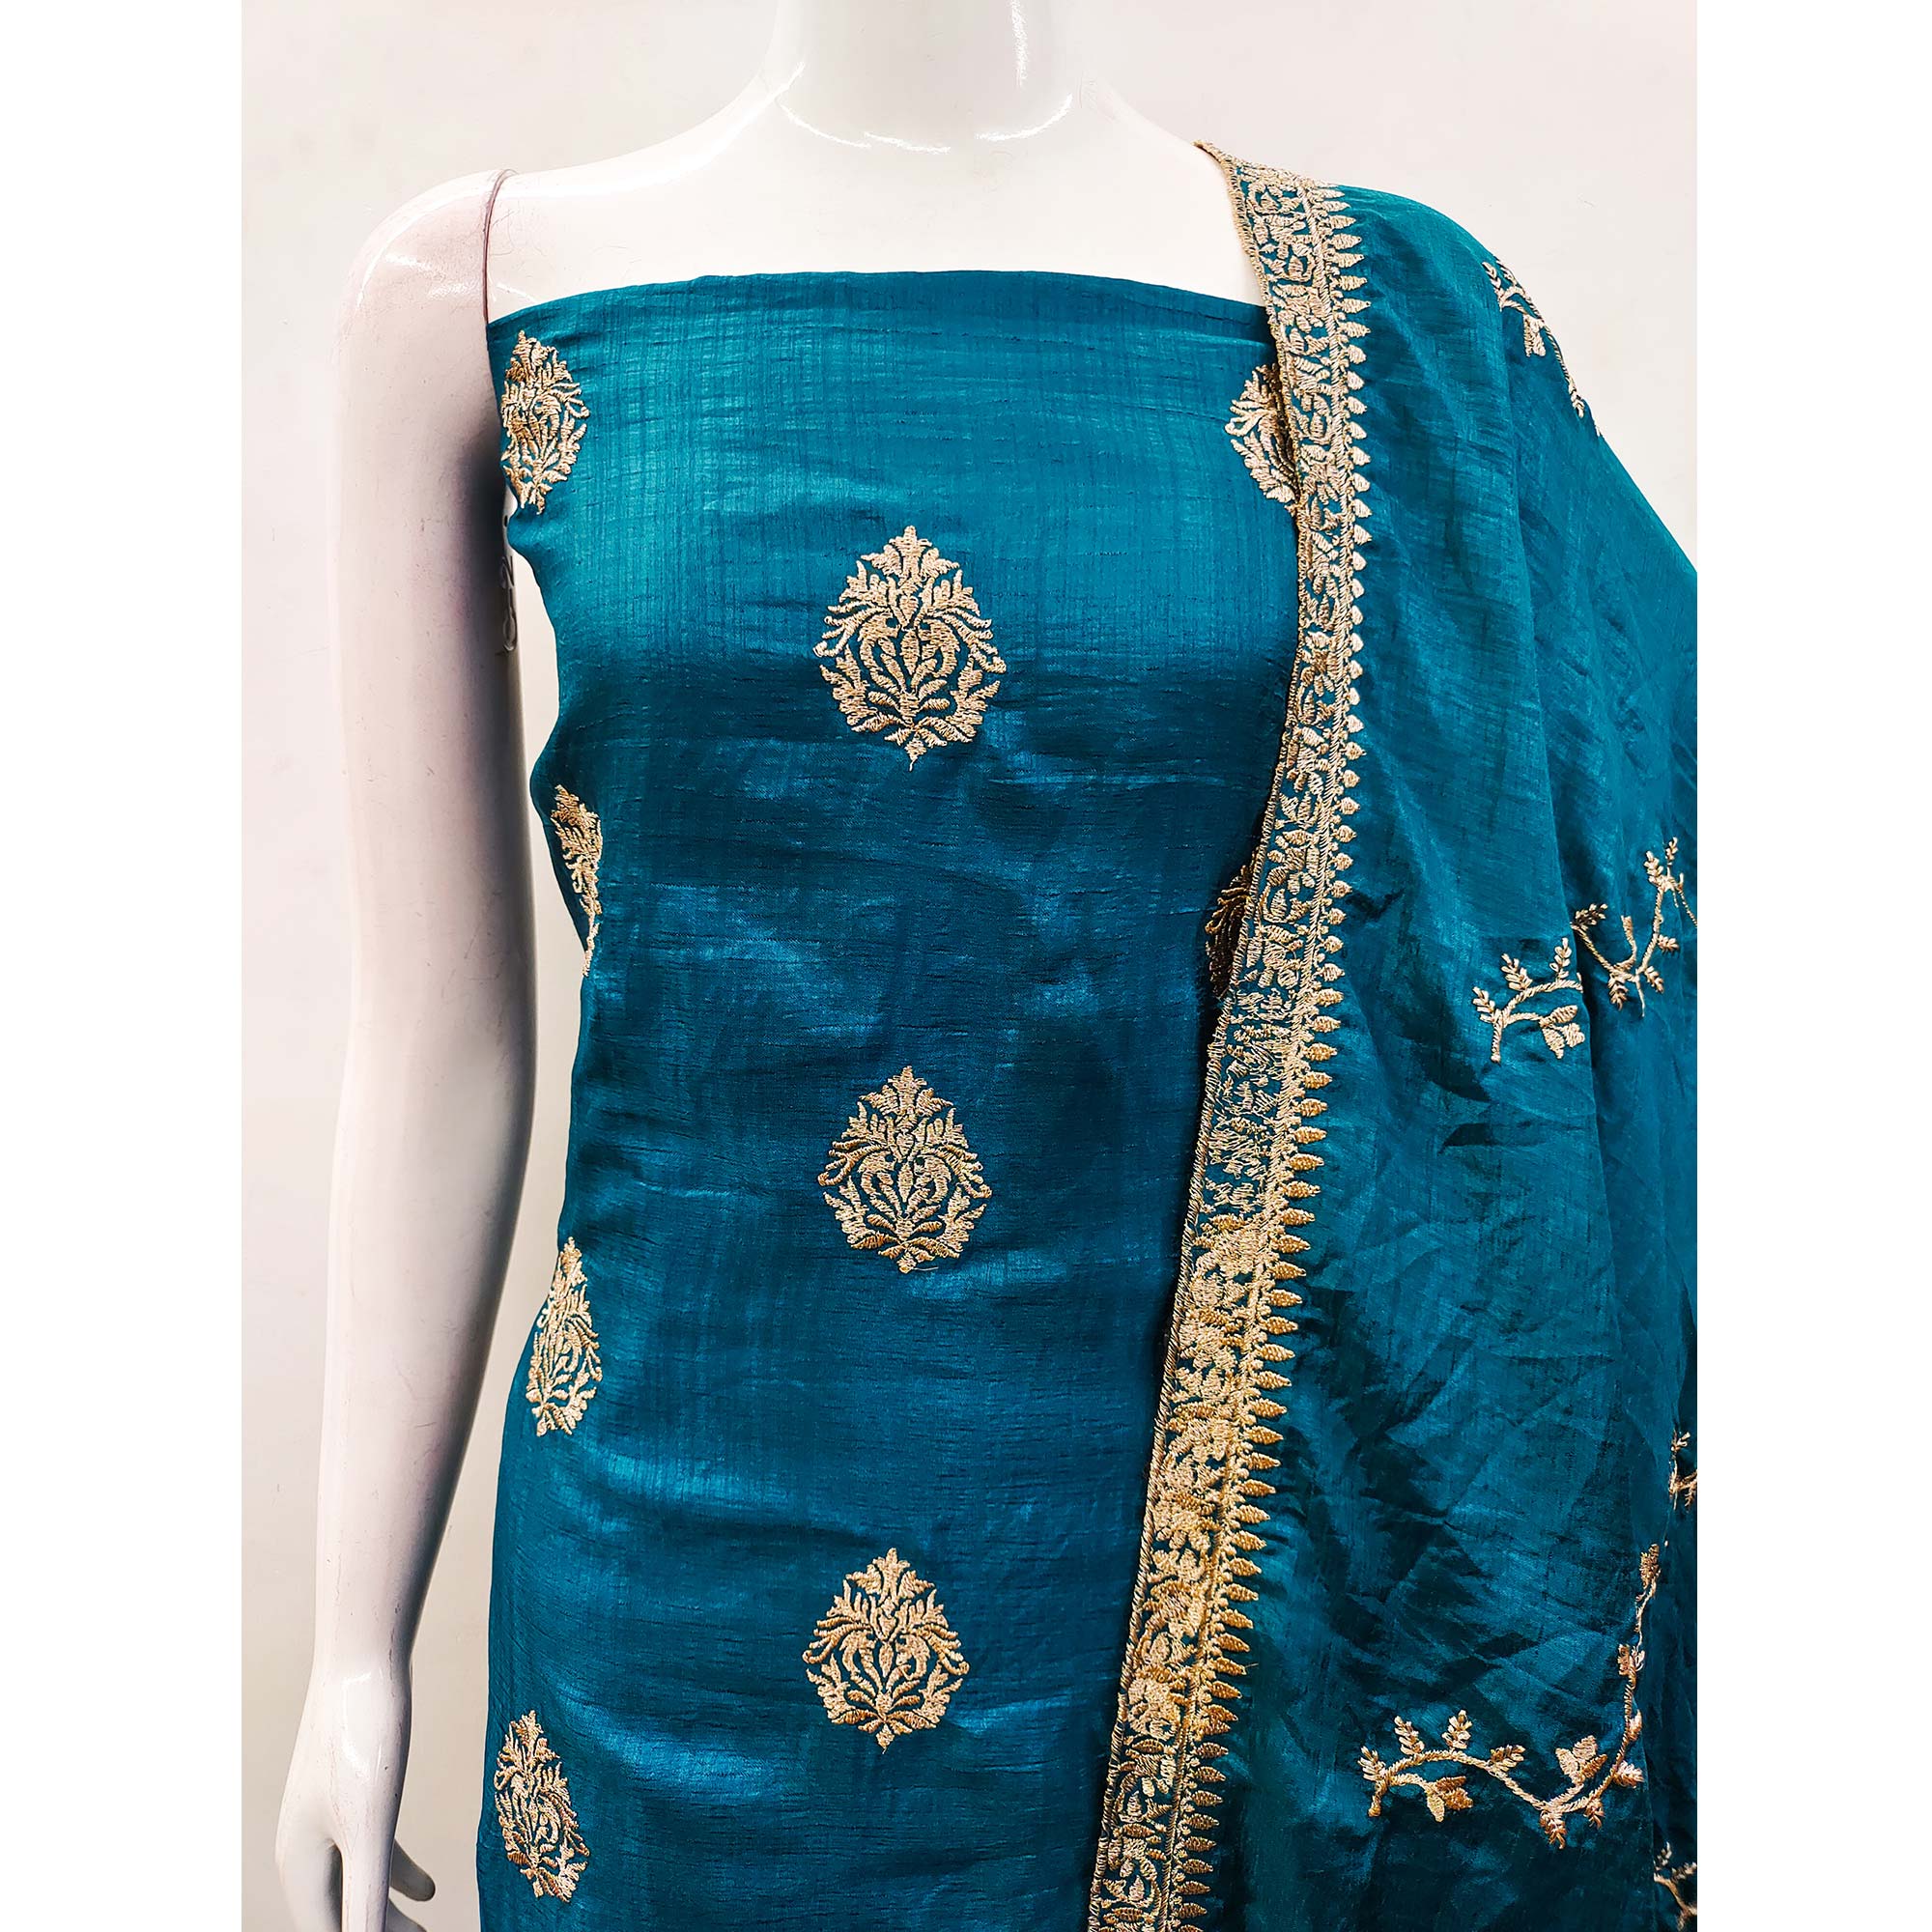 Morpich Floral Embroidered Vichitra Silk Dress Material